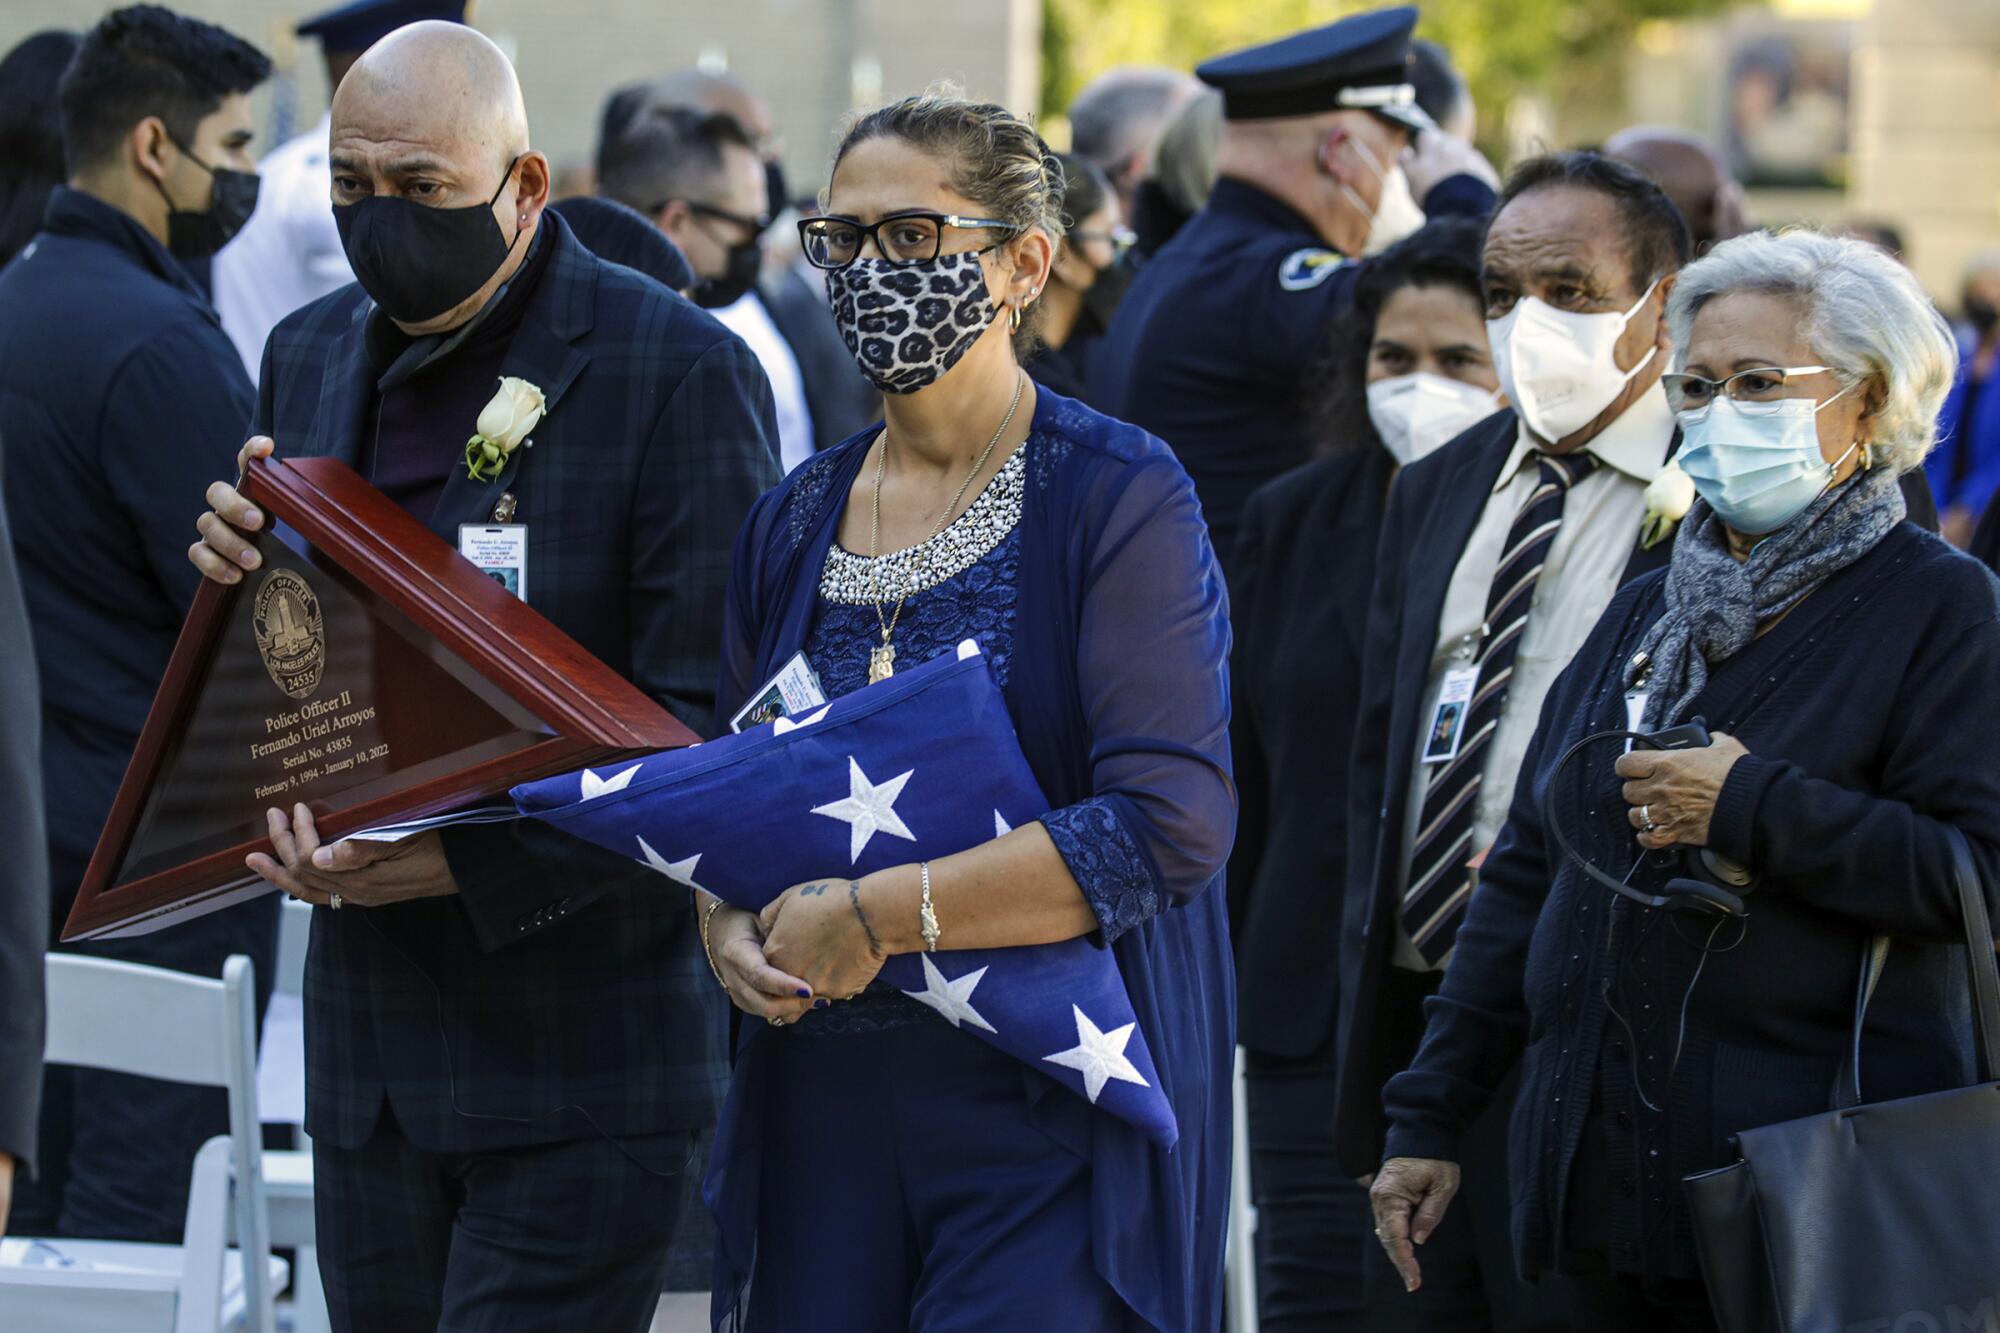 Karina Membreno, the mother of fallen LAPD Officer Fernando Arroyos, holds the flag given to her by LAPD Chief Michel Moore.